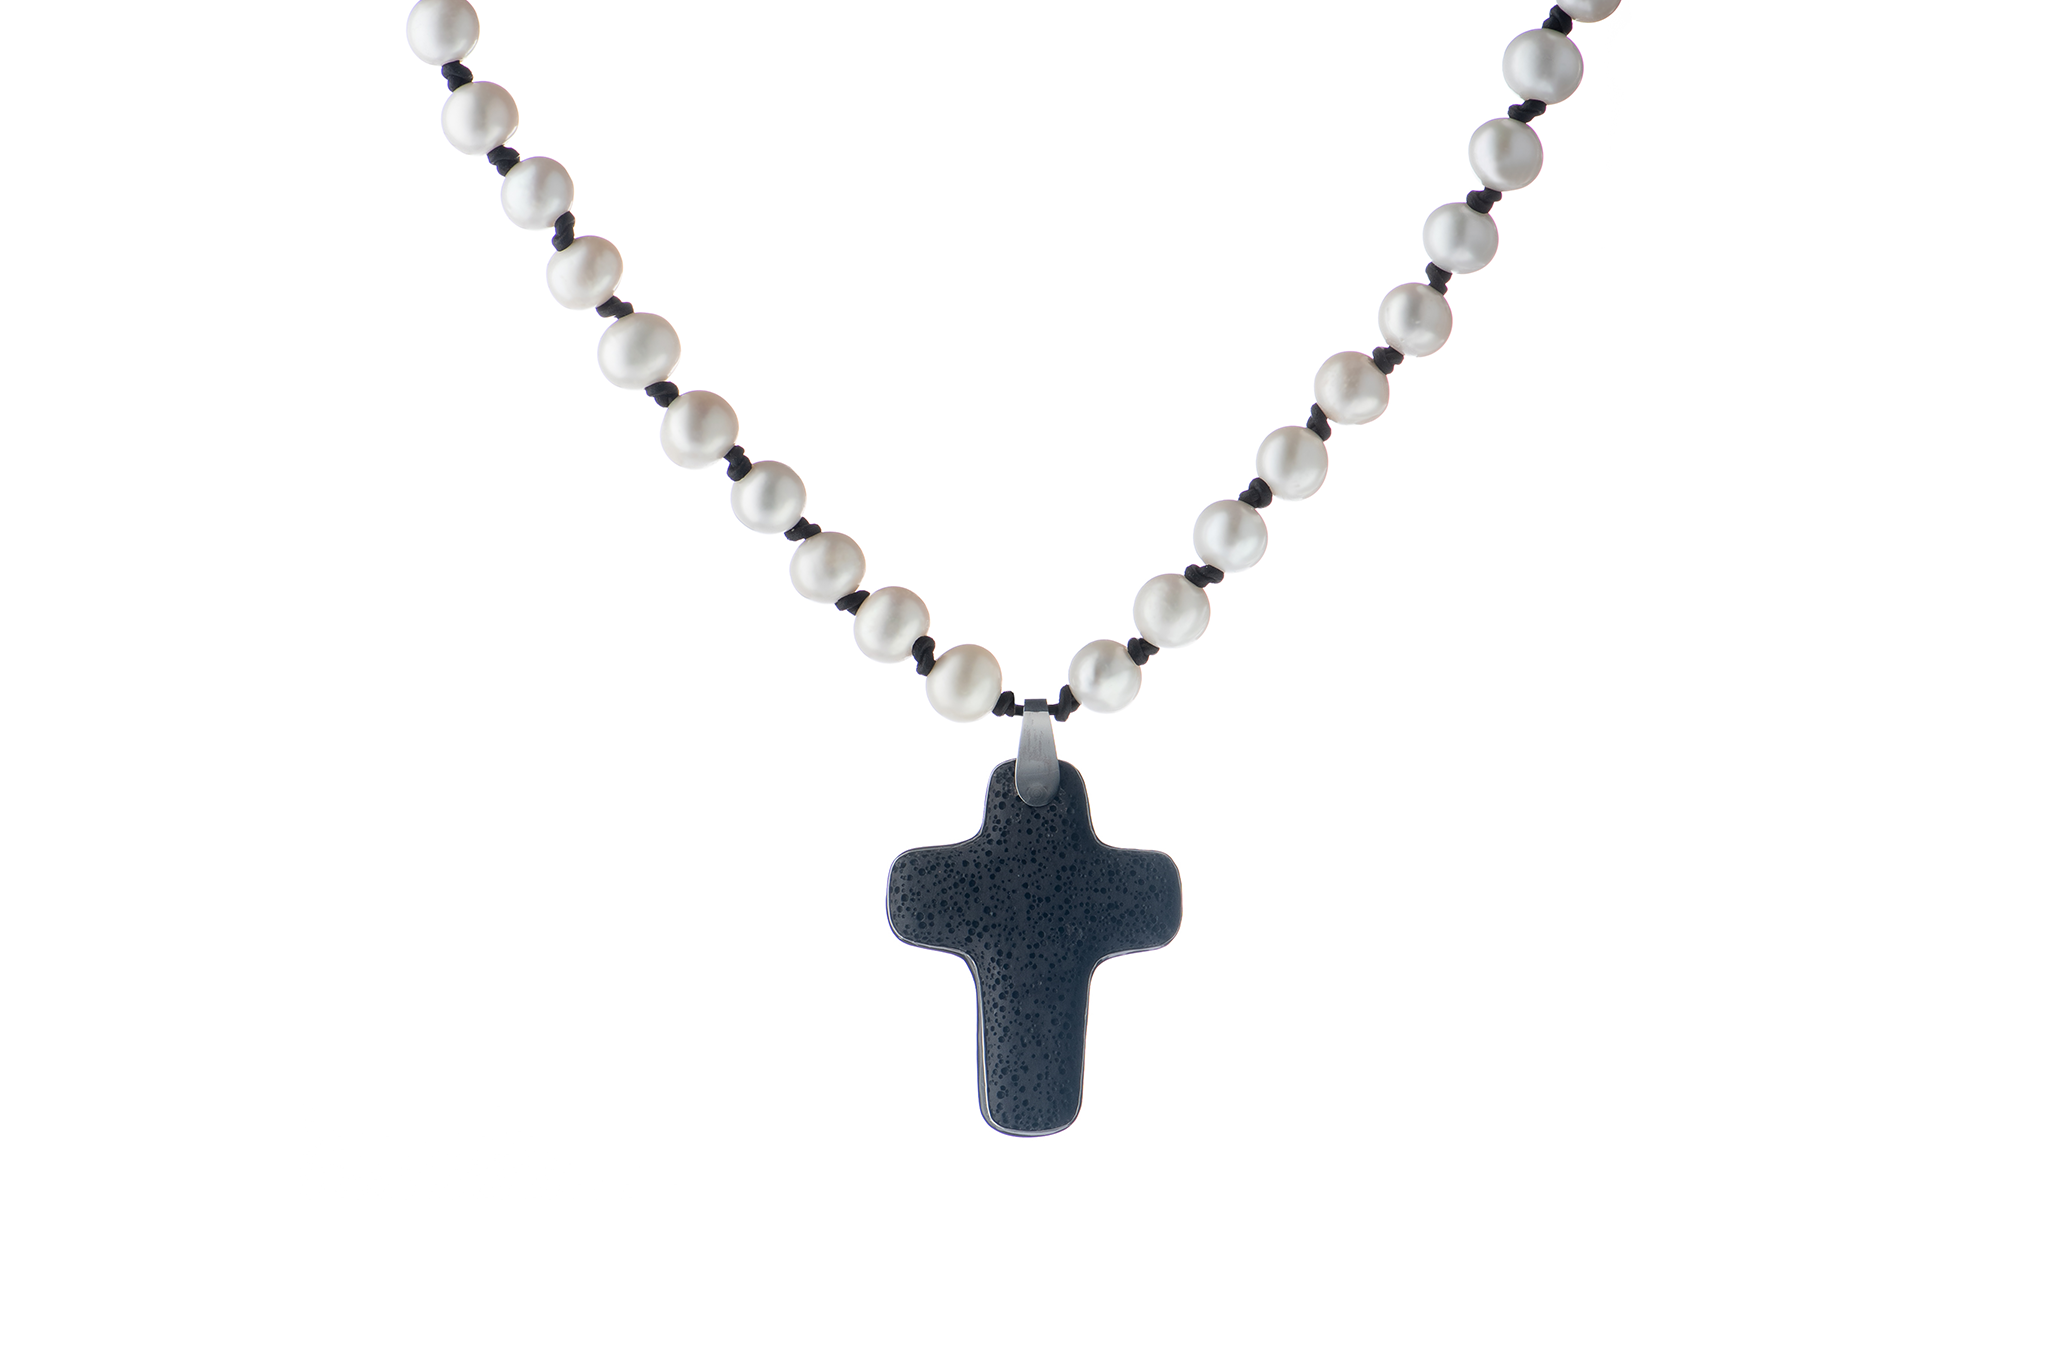 CResha Black Rosary Beads Necklace Alloy Acrylic Cross Pendant for Men and  Women Beads Brass Locket Price in India - Buy CResha Black Rosary Beads  Necklace Alloy Acrylic Cross Pendant for Men